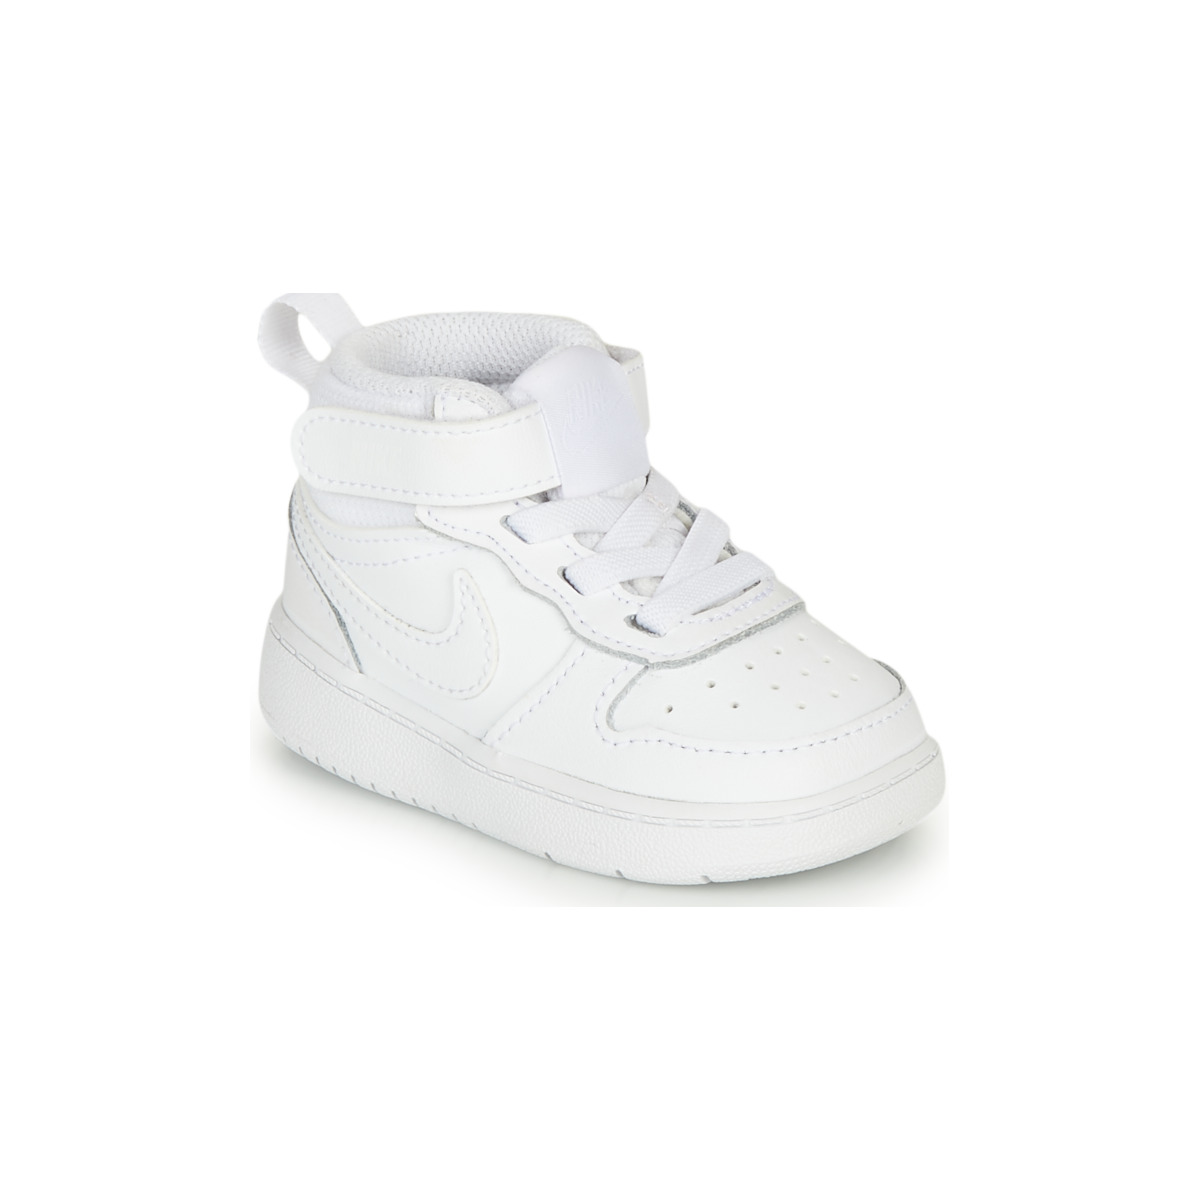 Nike Court Borough Mid 2 Td White Free Delivery Spartoo Net Shoes Low Top Trainers Child Usd 48 00